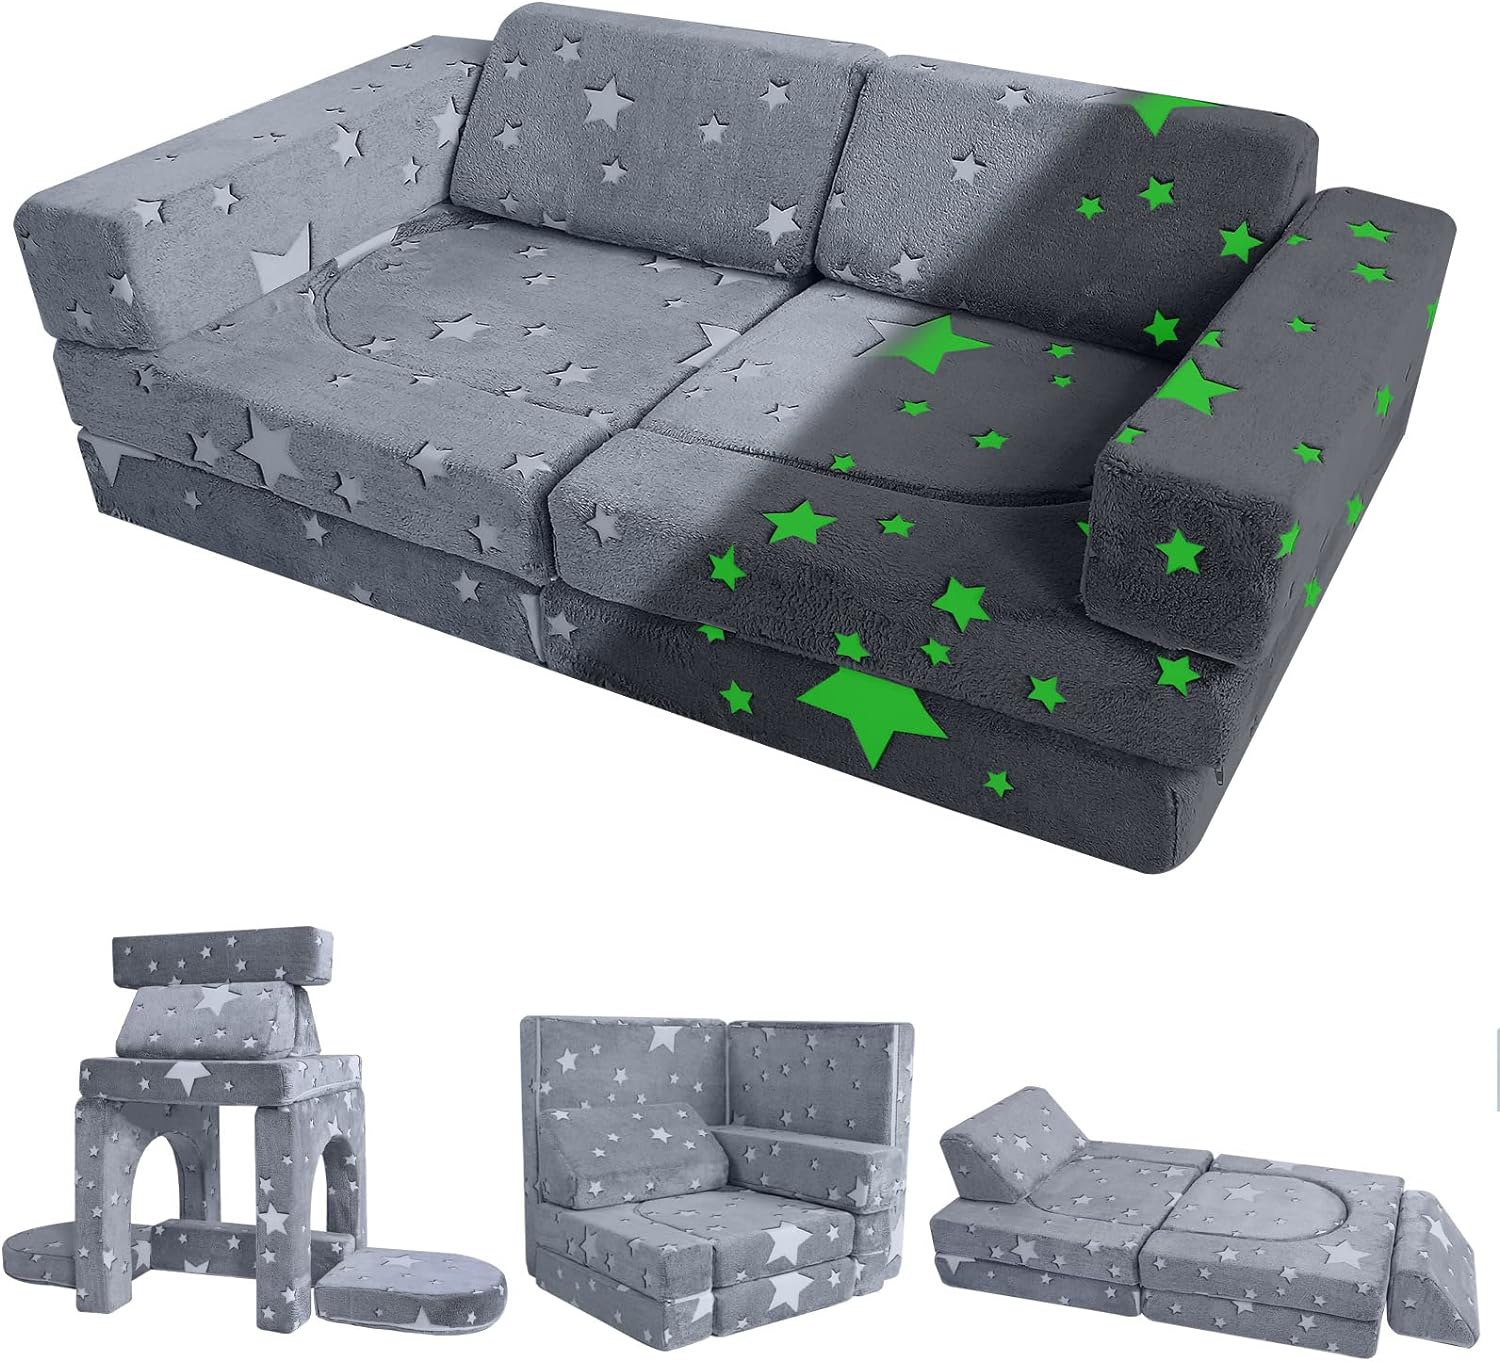 MeMoreCool Kids Couch Sofa 10-Piece, Toddler Glow Star Sofa for Playroom, Fold Out Foam Couch for Girl Boy, Convertible Modular Play Set